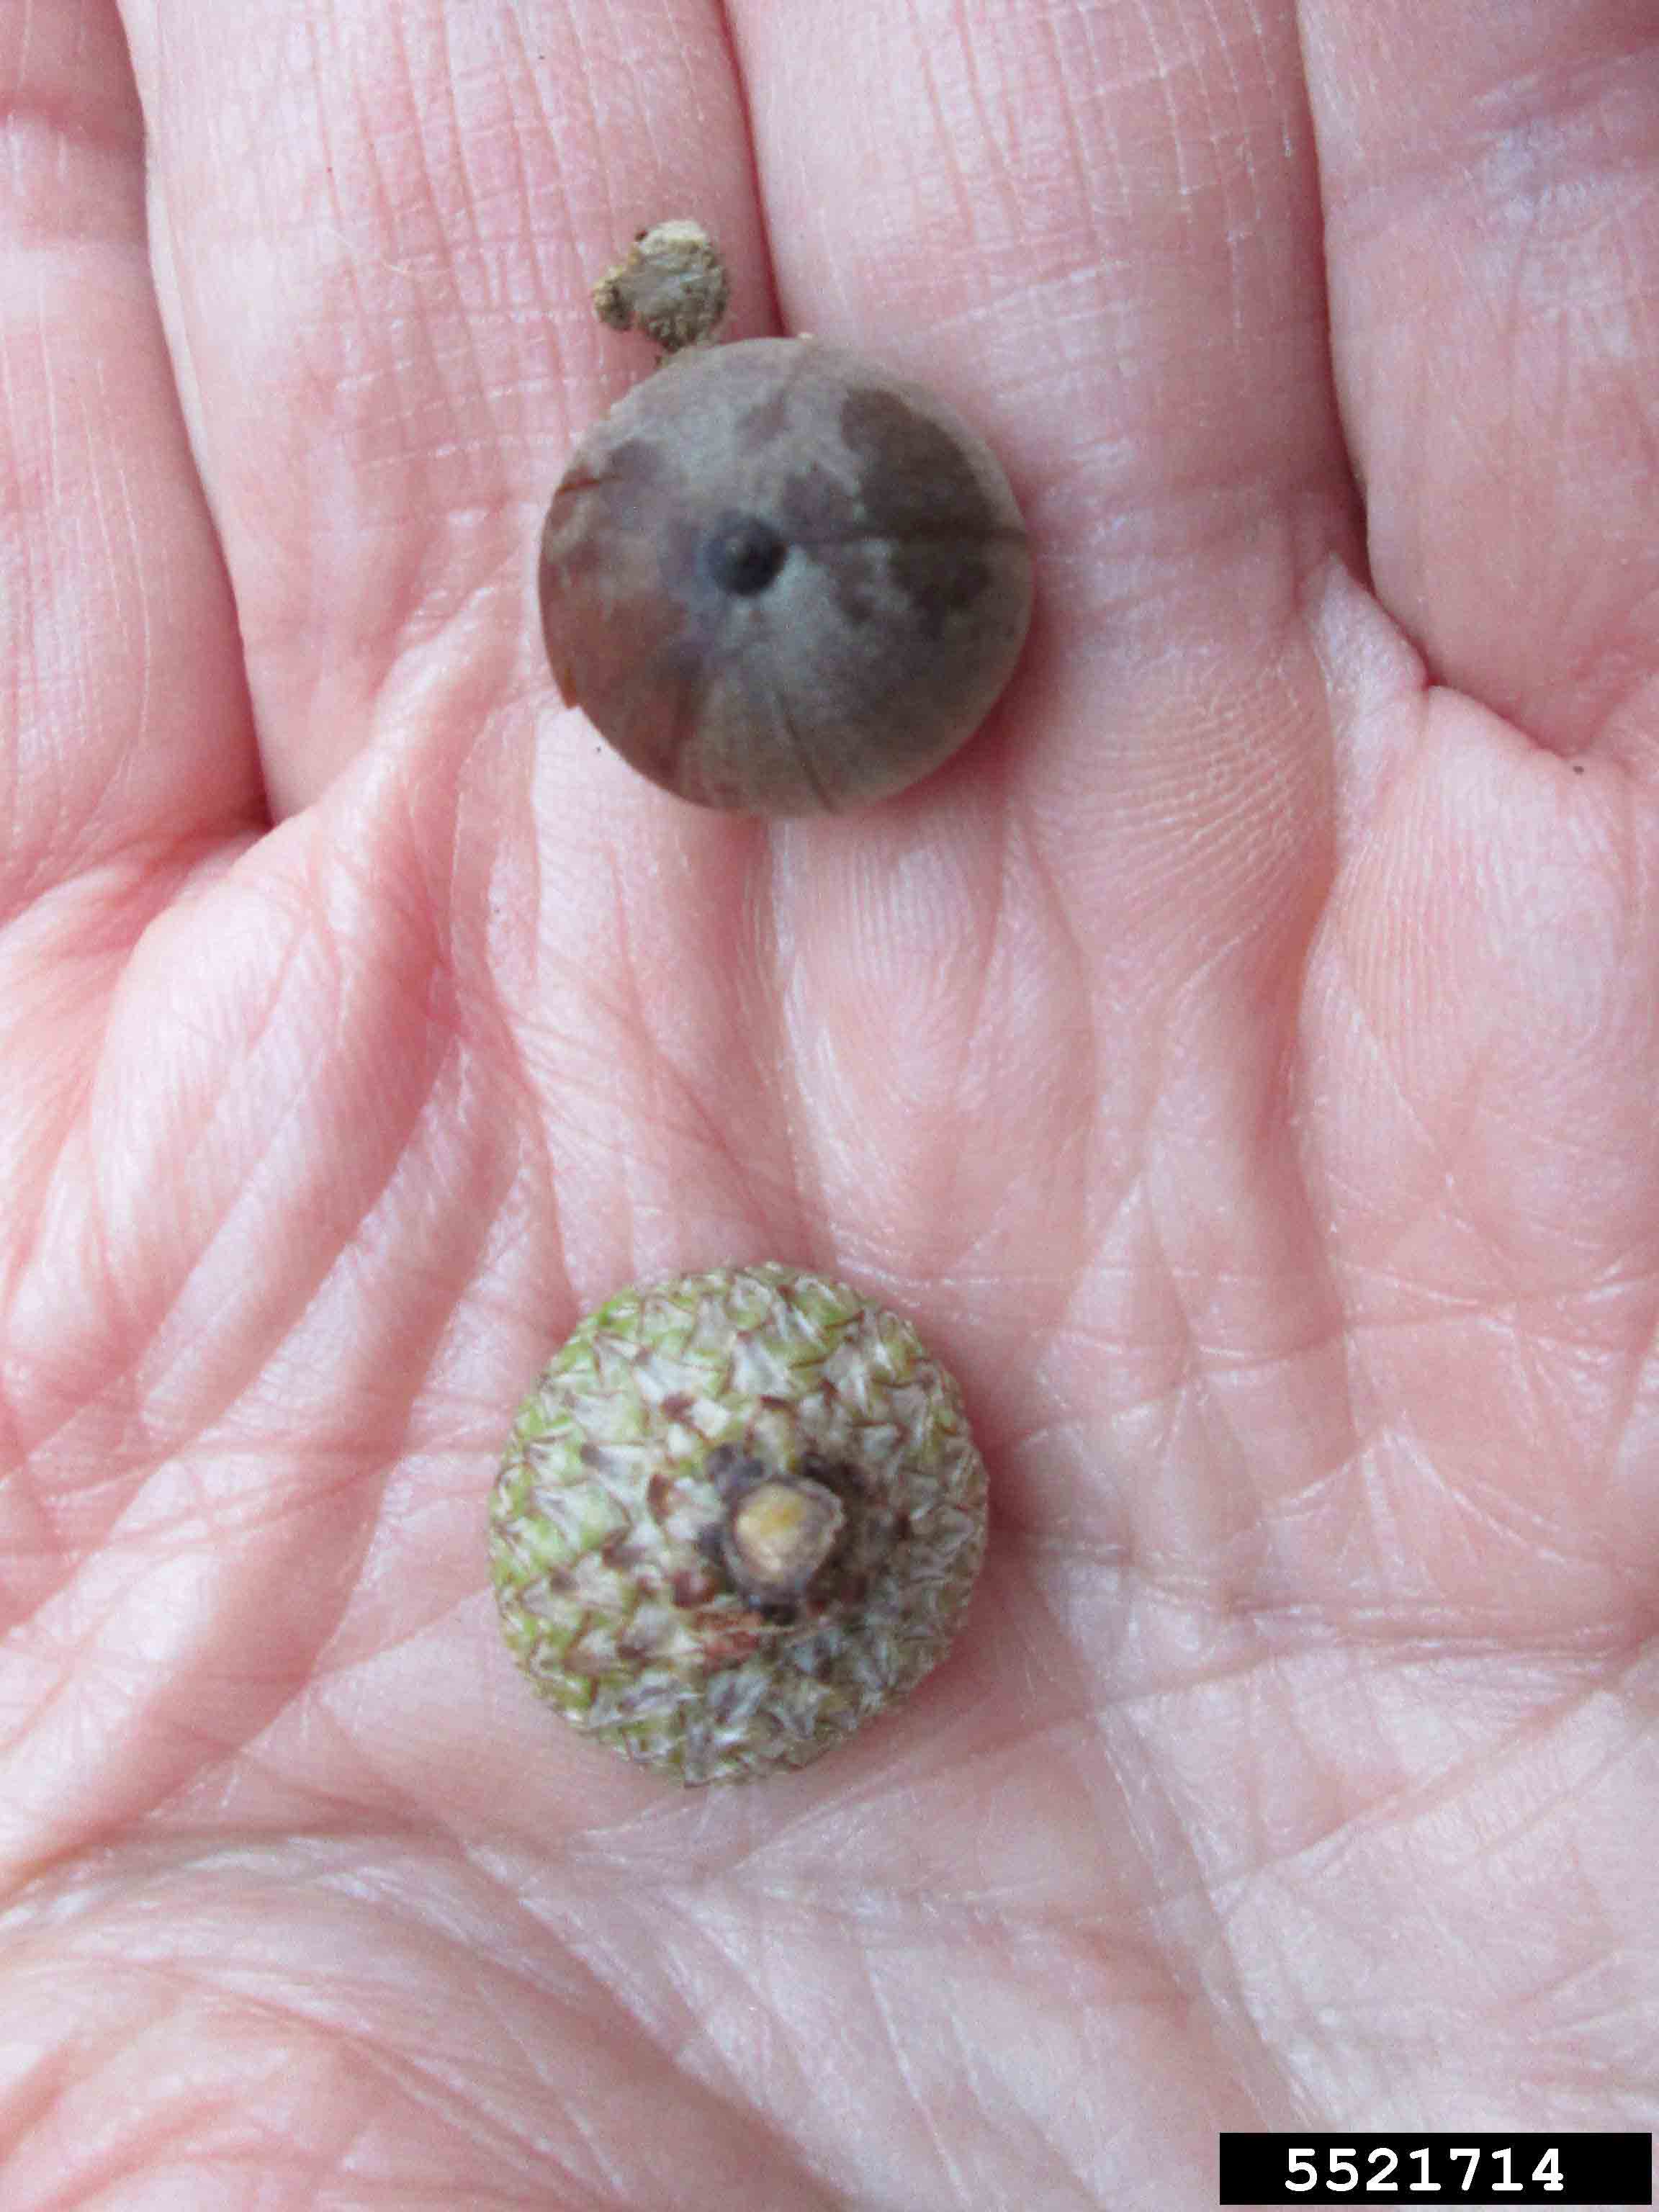 Willow oak acorn and cup